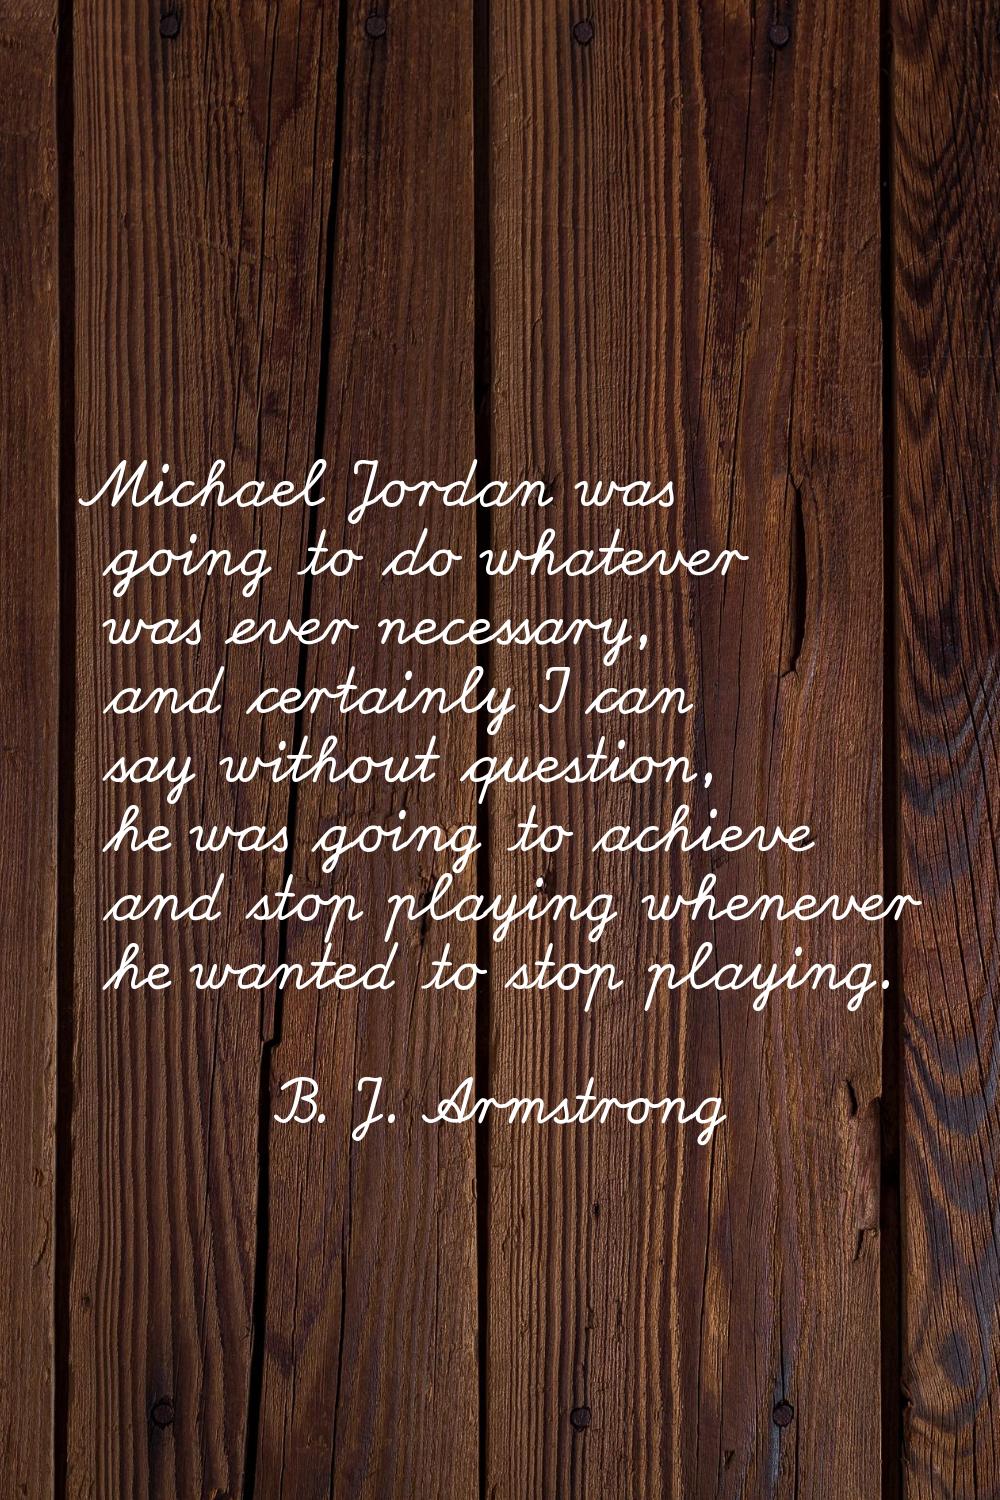 Michael Jordan was going to do whatever was ever necessary, and certainly I can say without questio